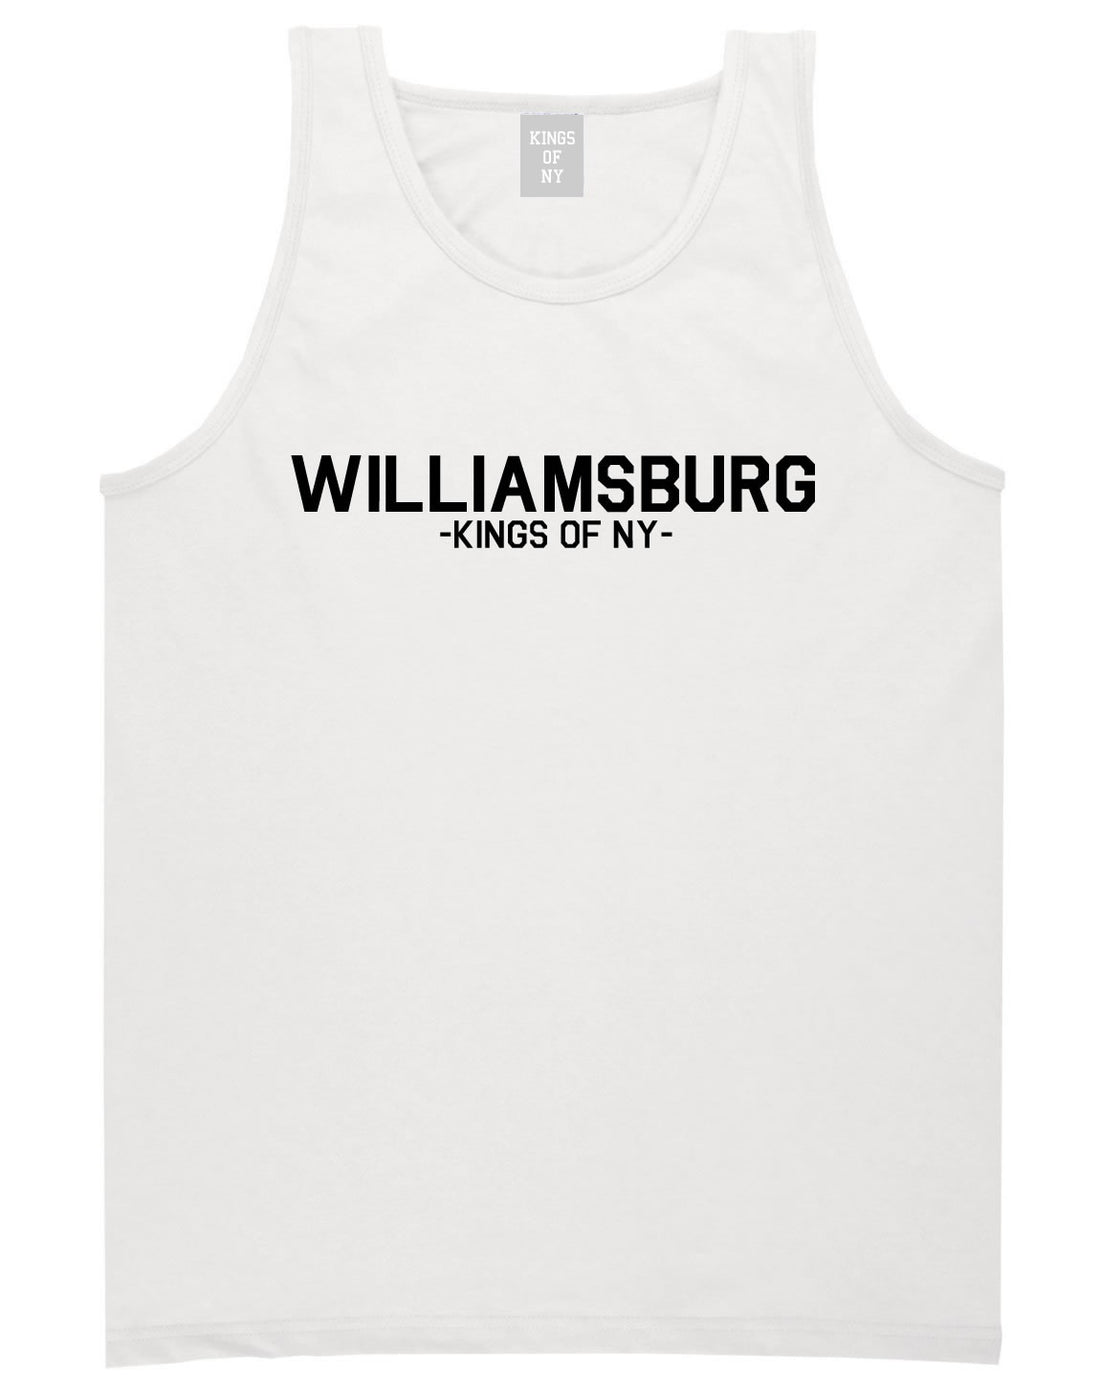 Williamsburg Brooklyn Hipster Tank Top in White